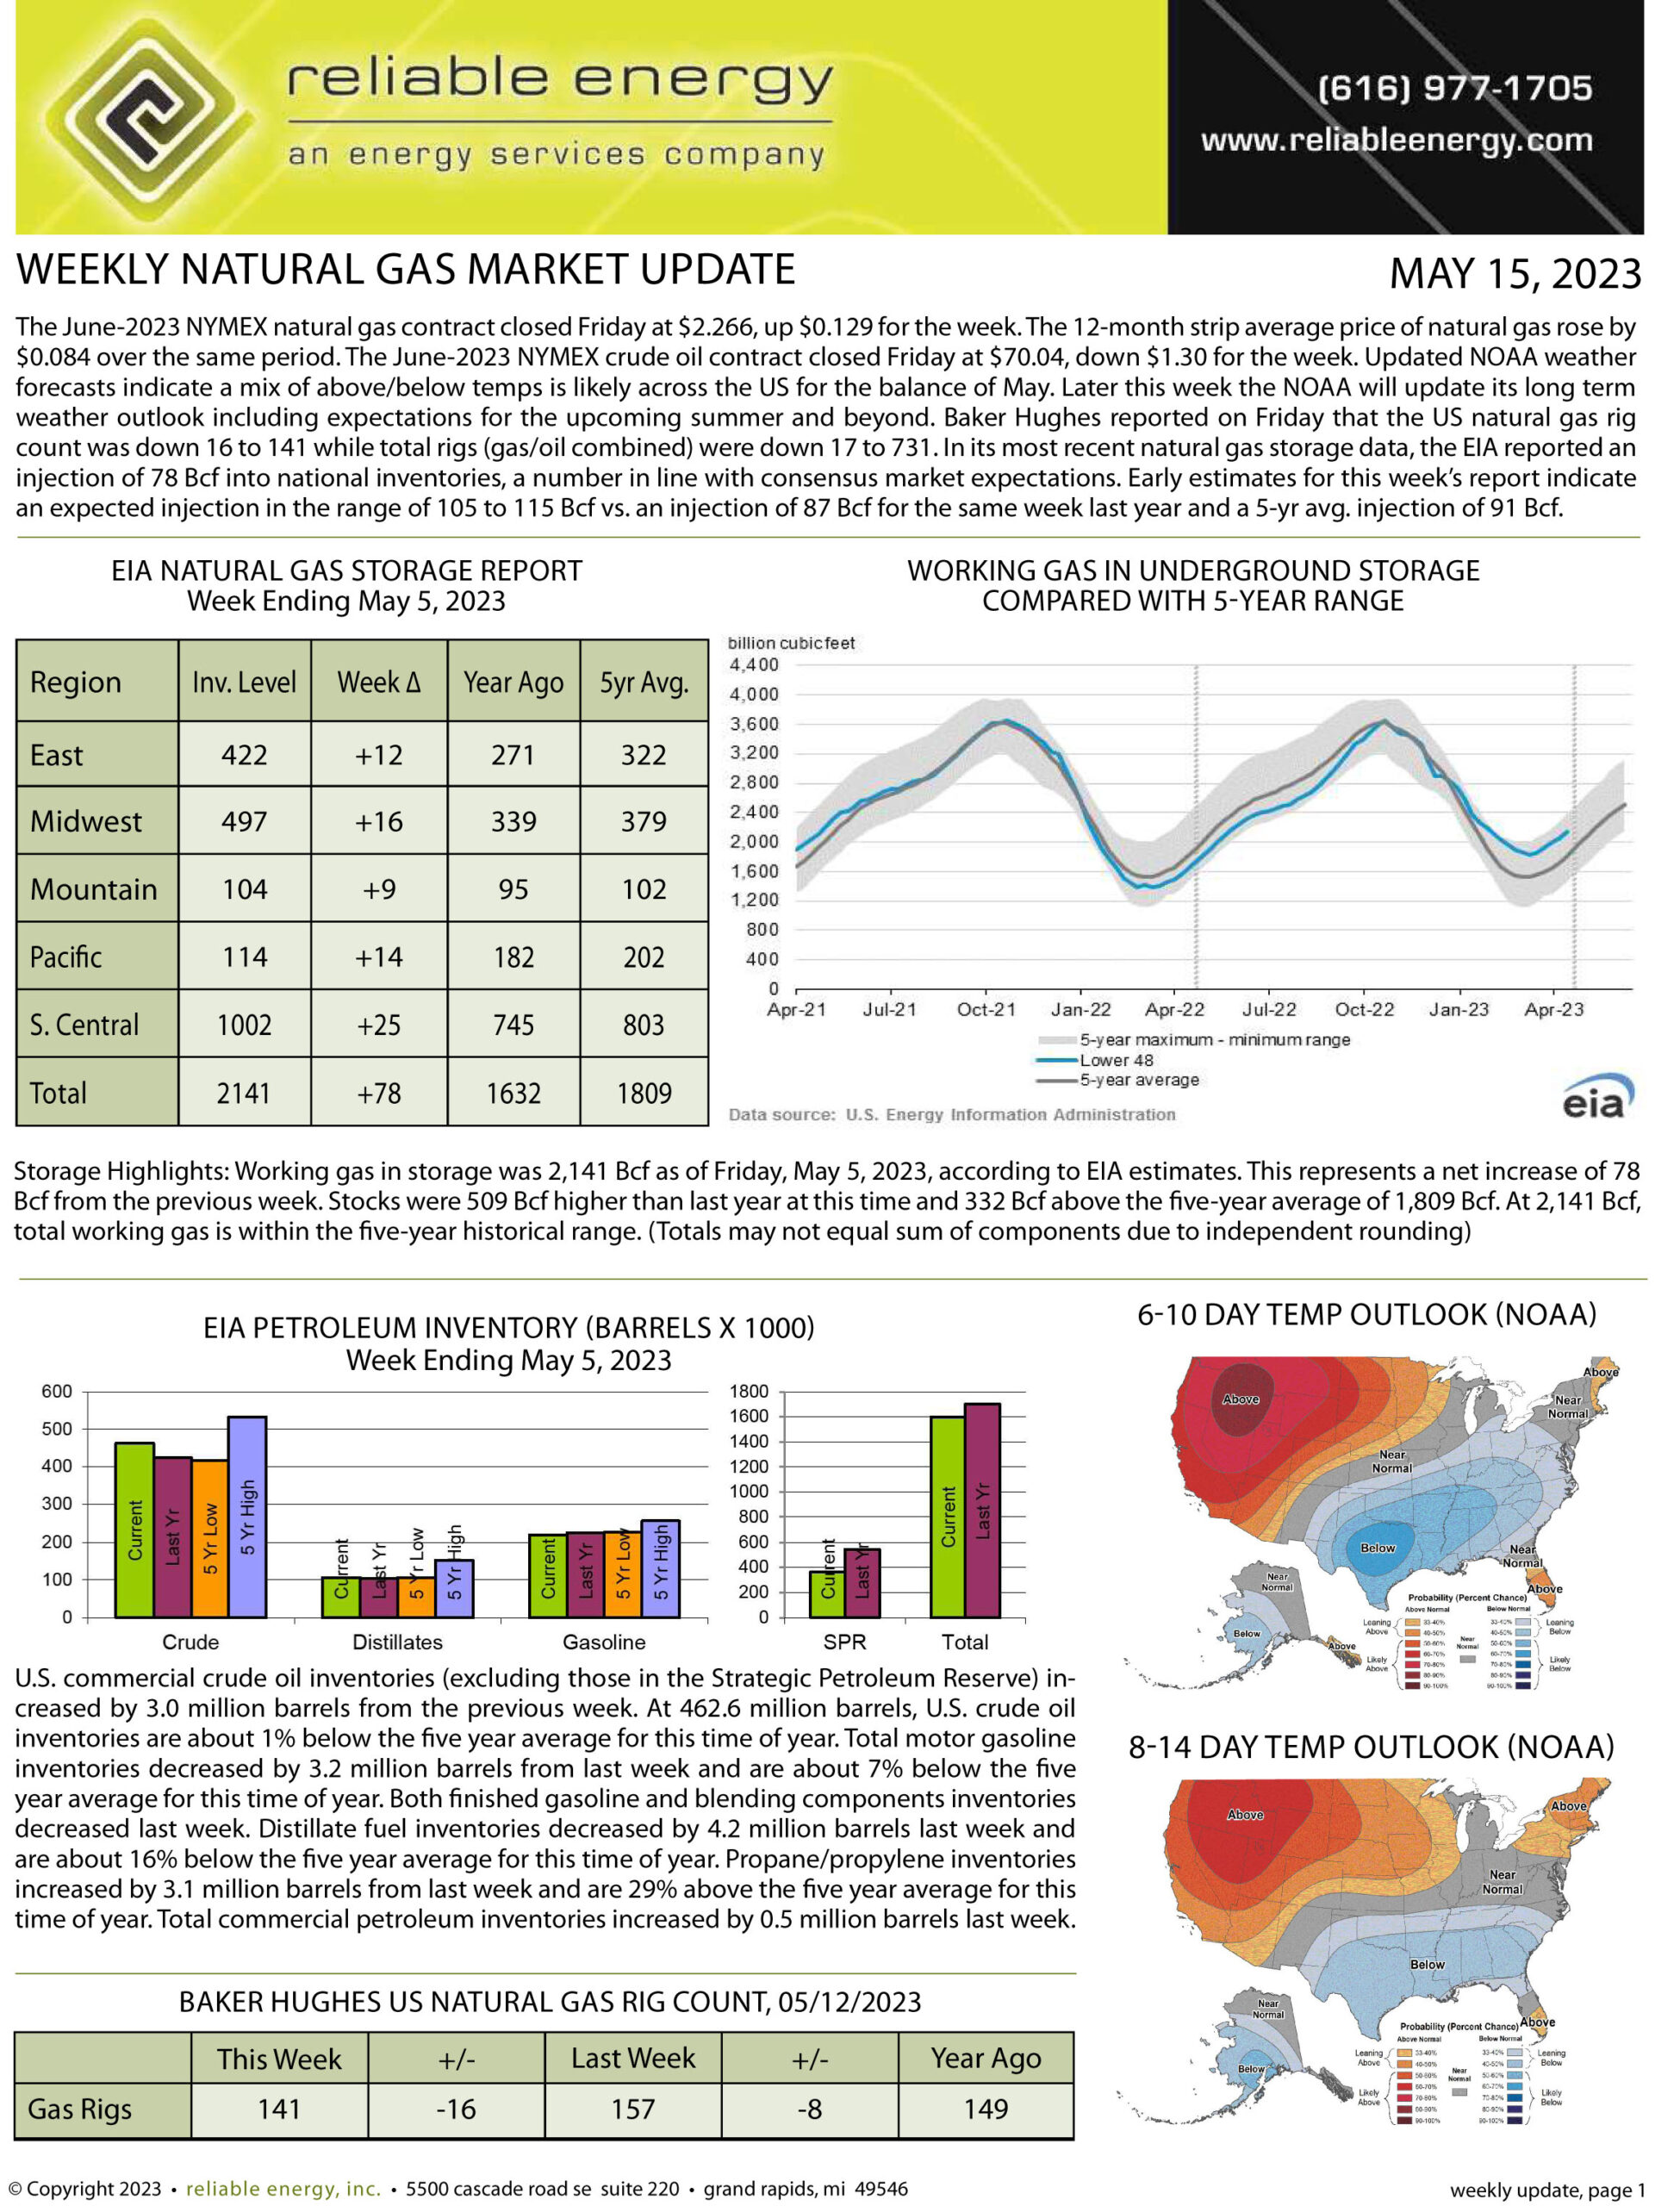 Natural Gas Market Update – May 15, 2023